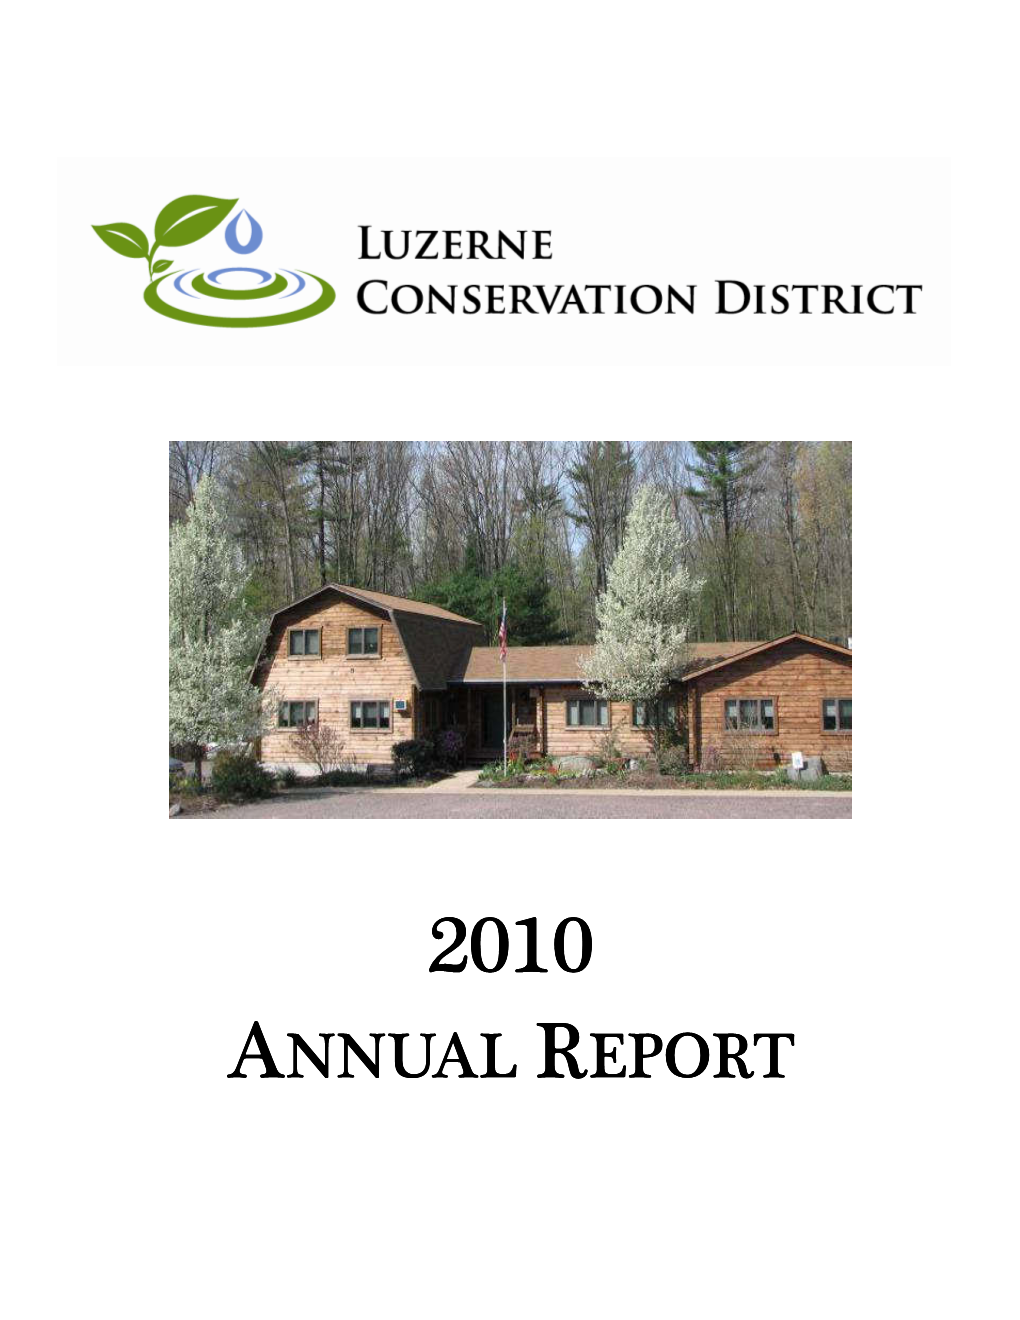 Luzerne Conservation District 2010 Annual Report